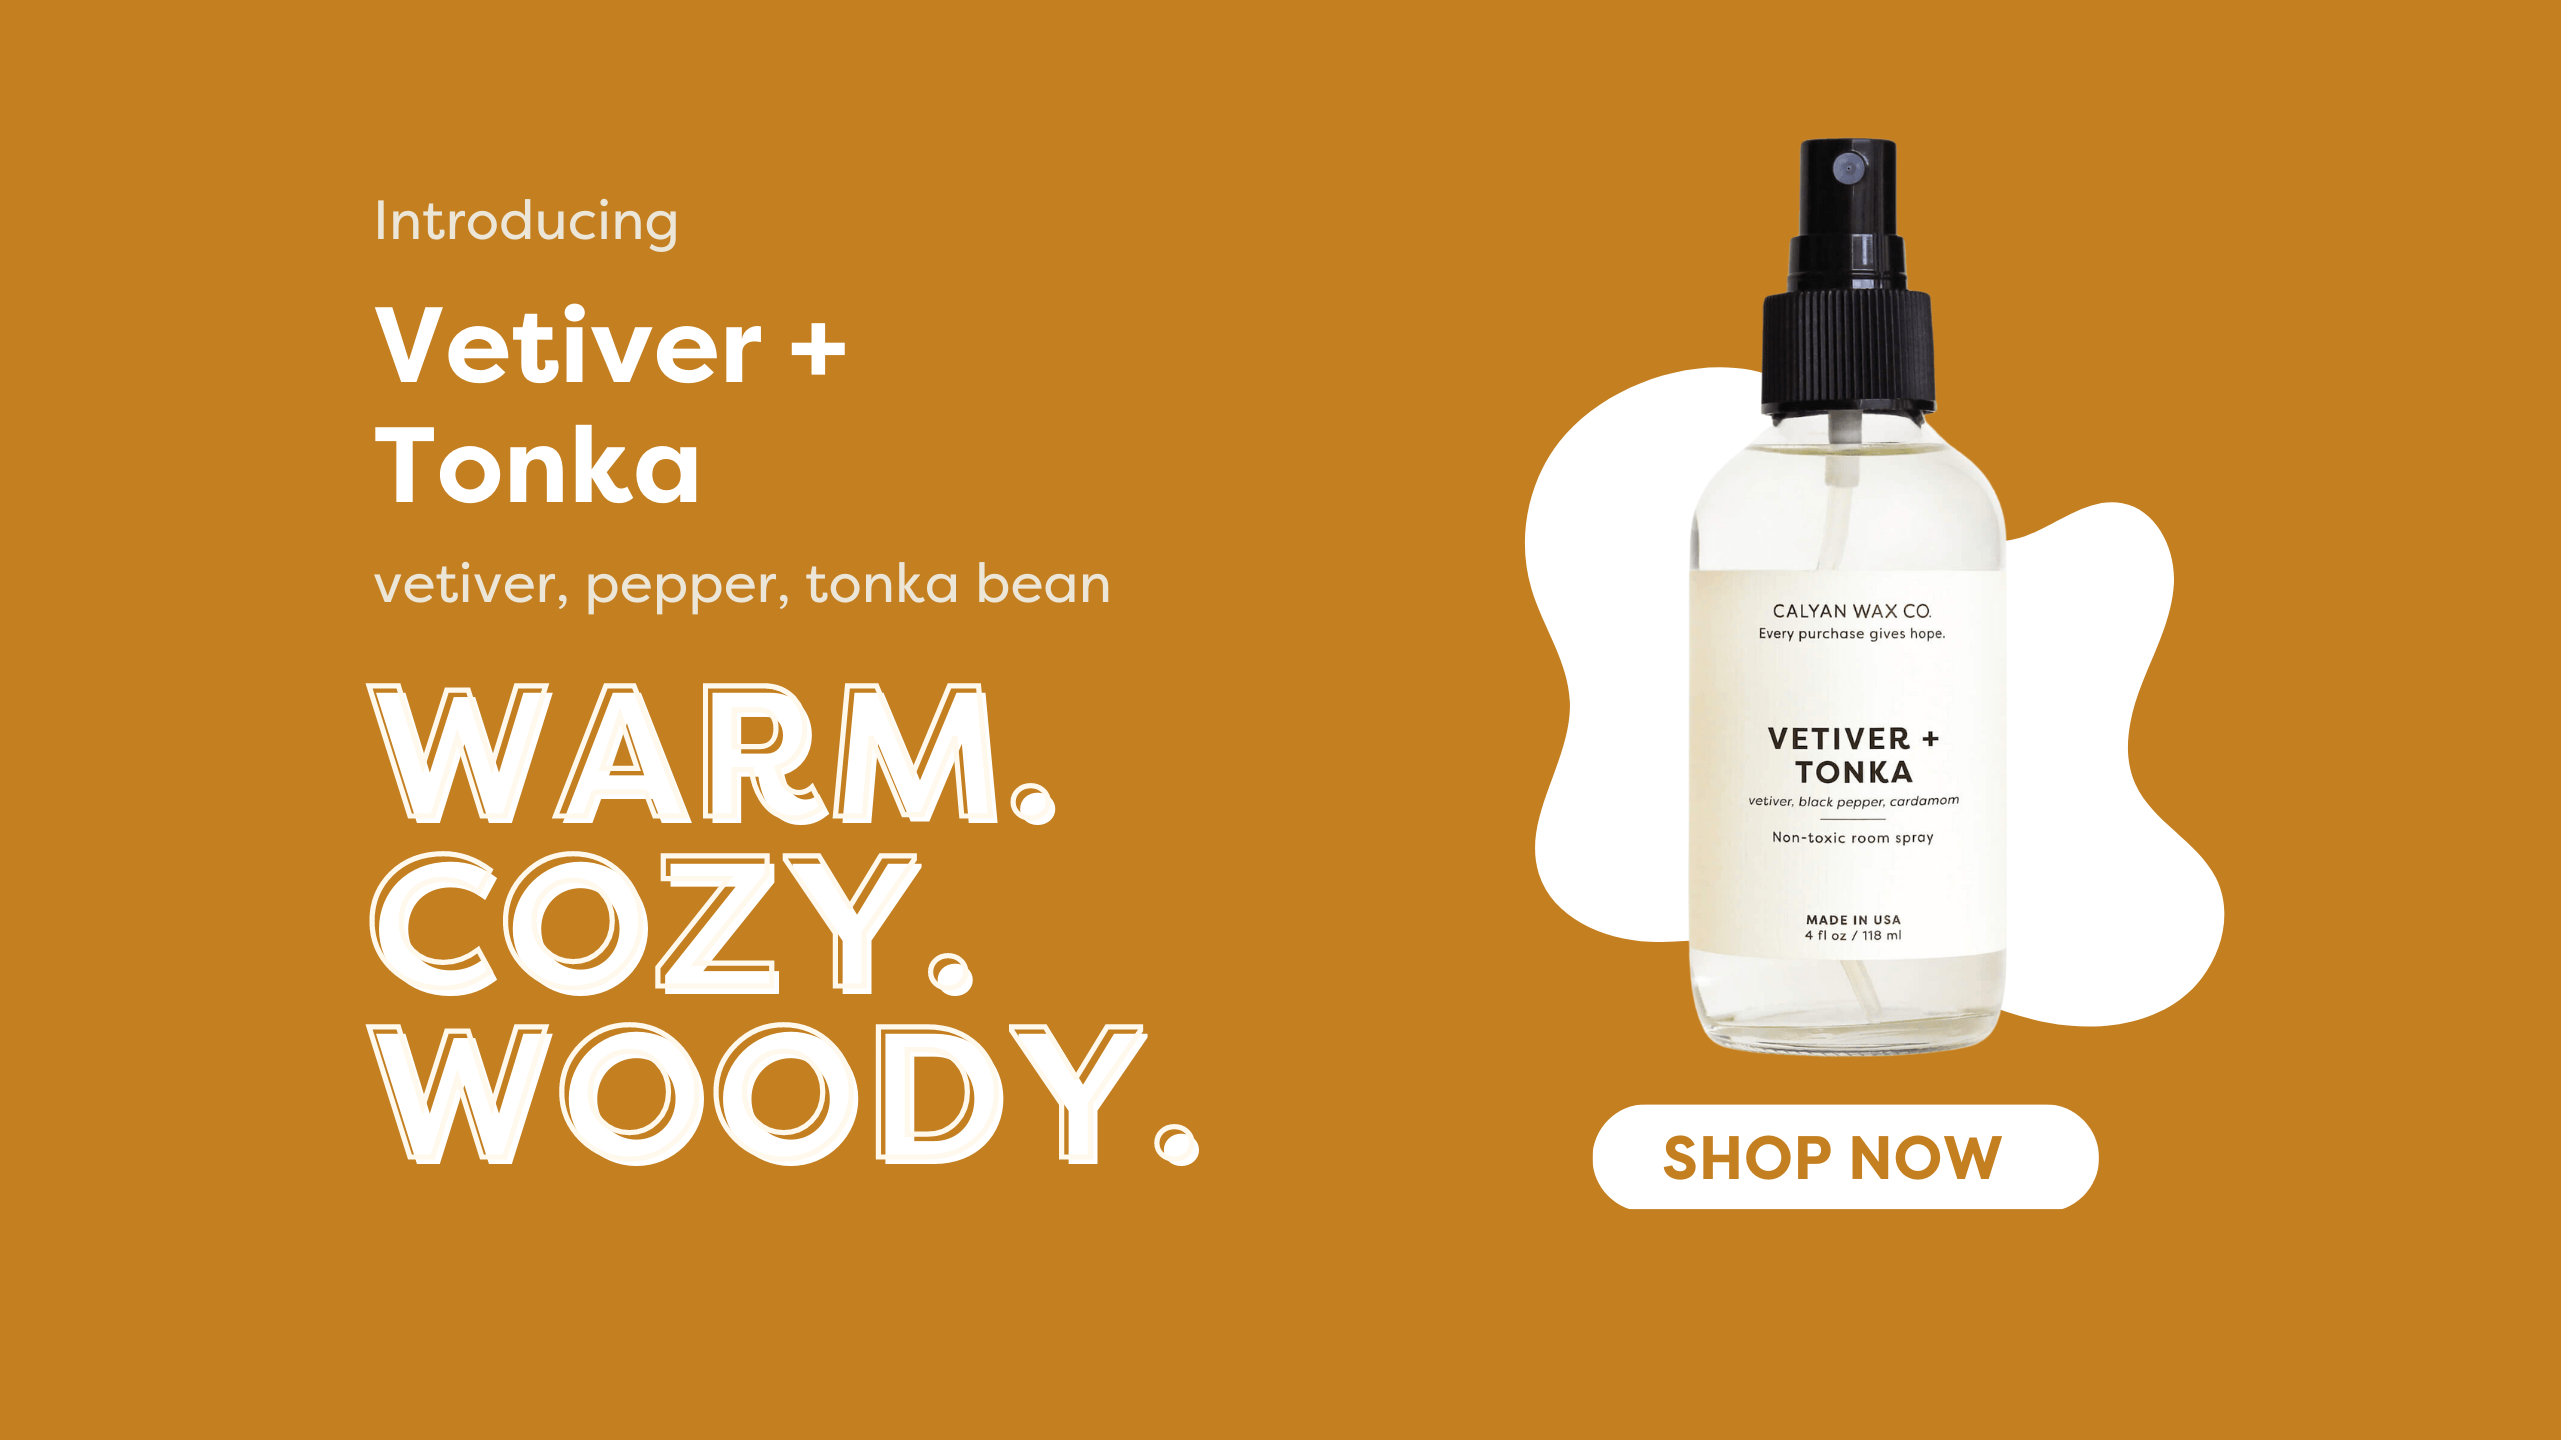 Vetiver + Tonka Room Spray with Buy Now Button - smells like vetiver, pepper, and tonka bean - warm woody and cozy